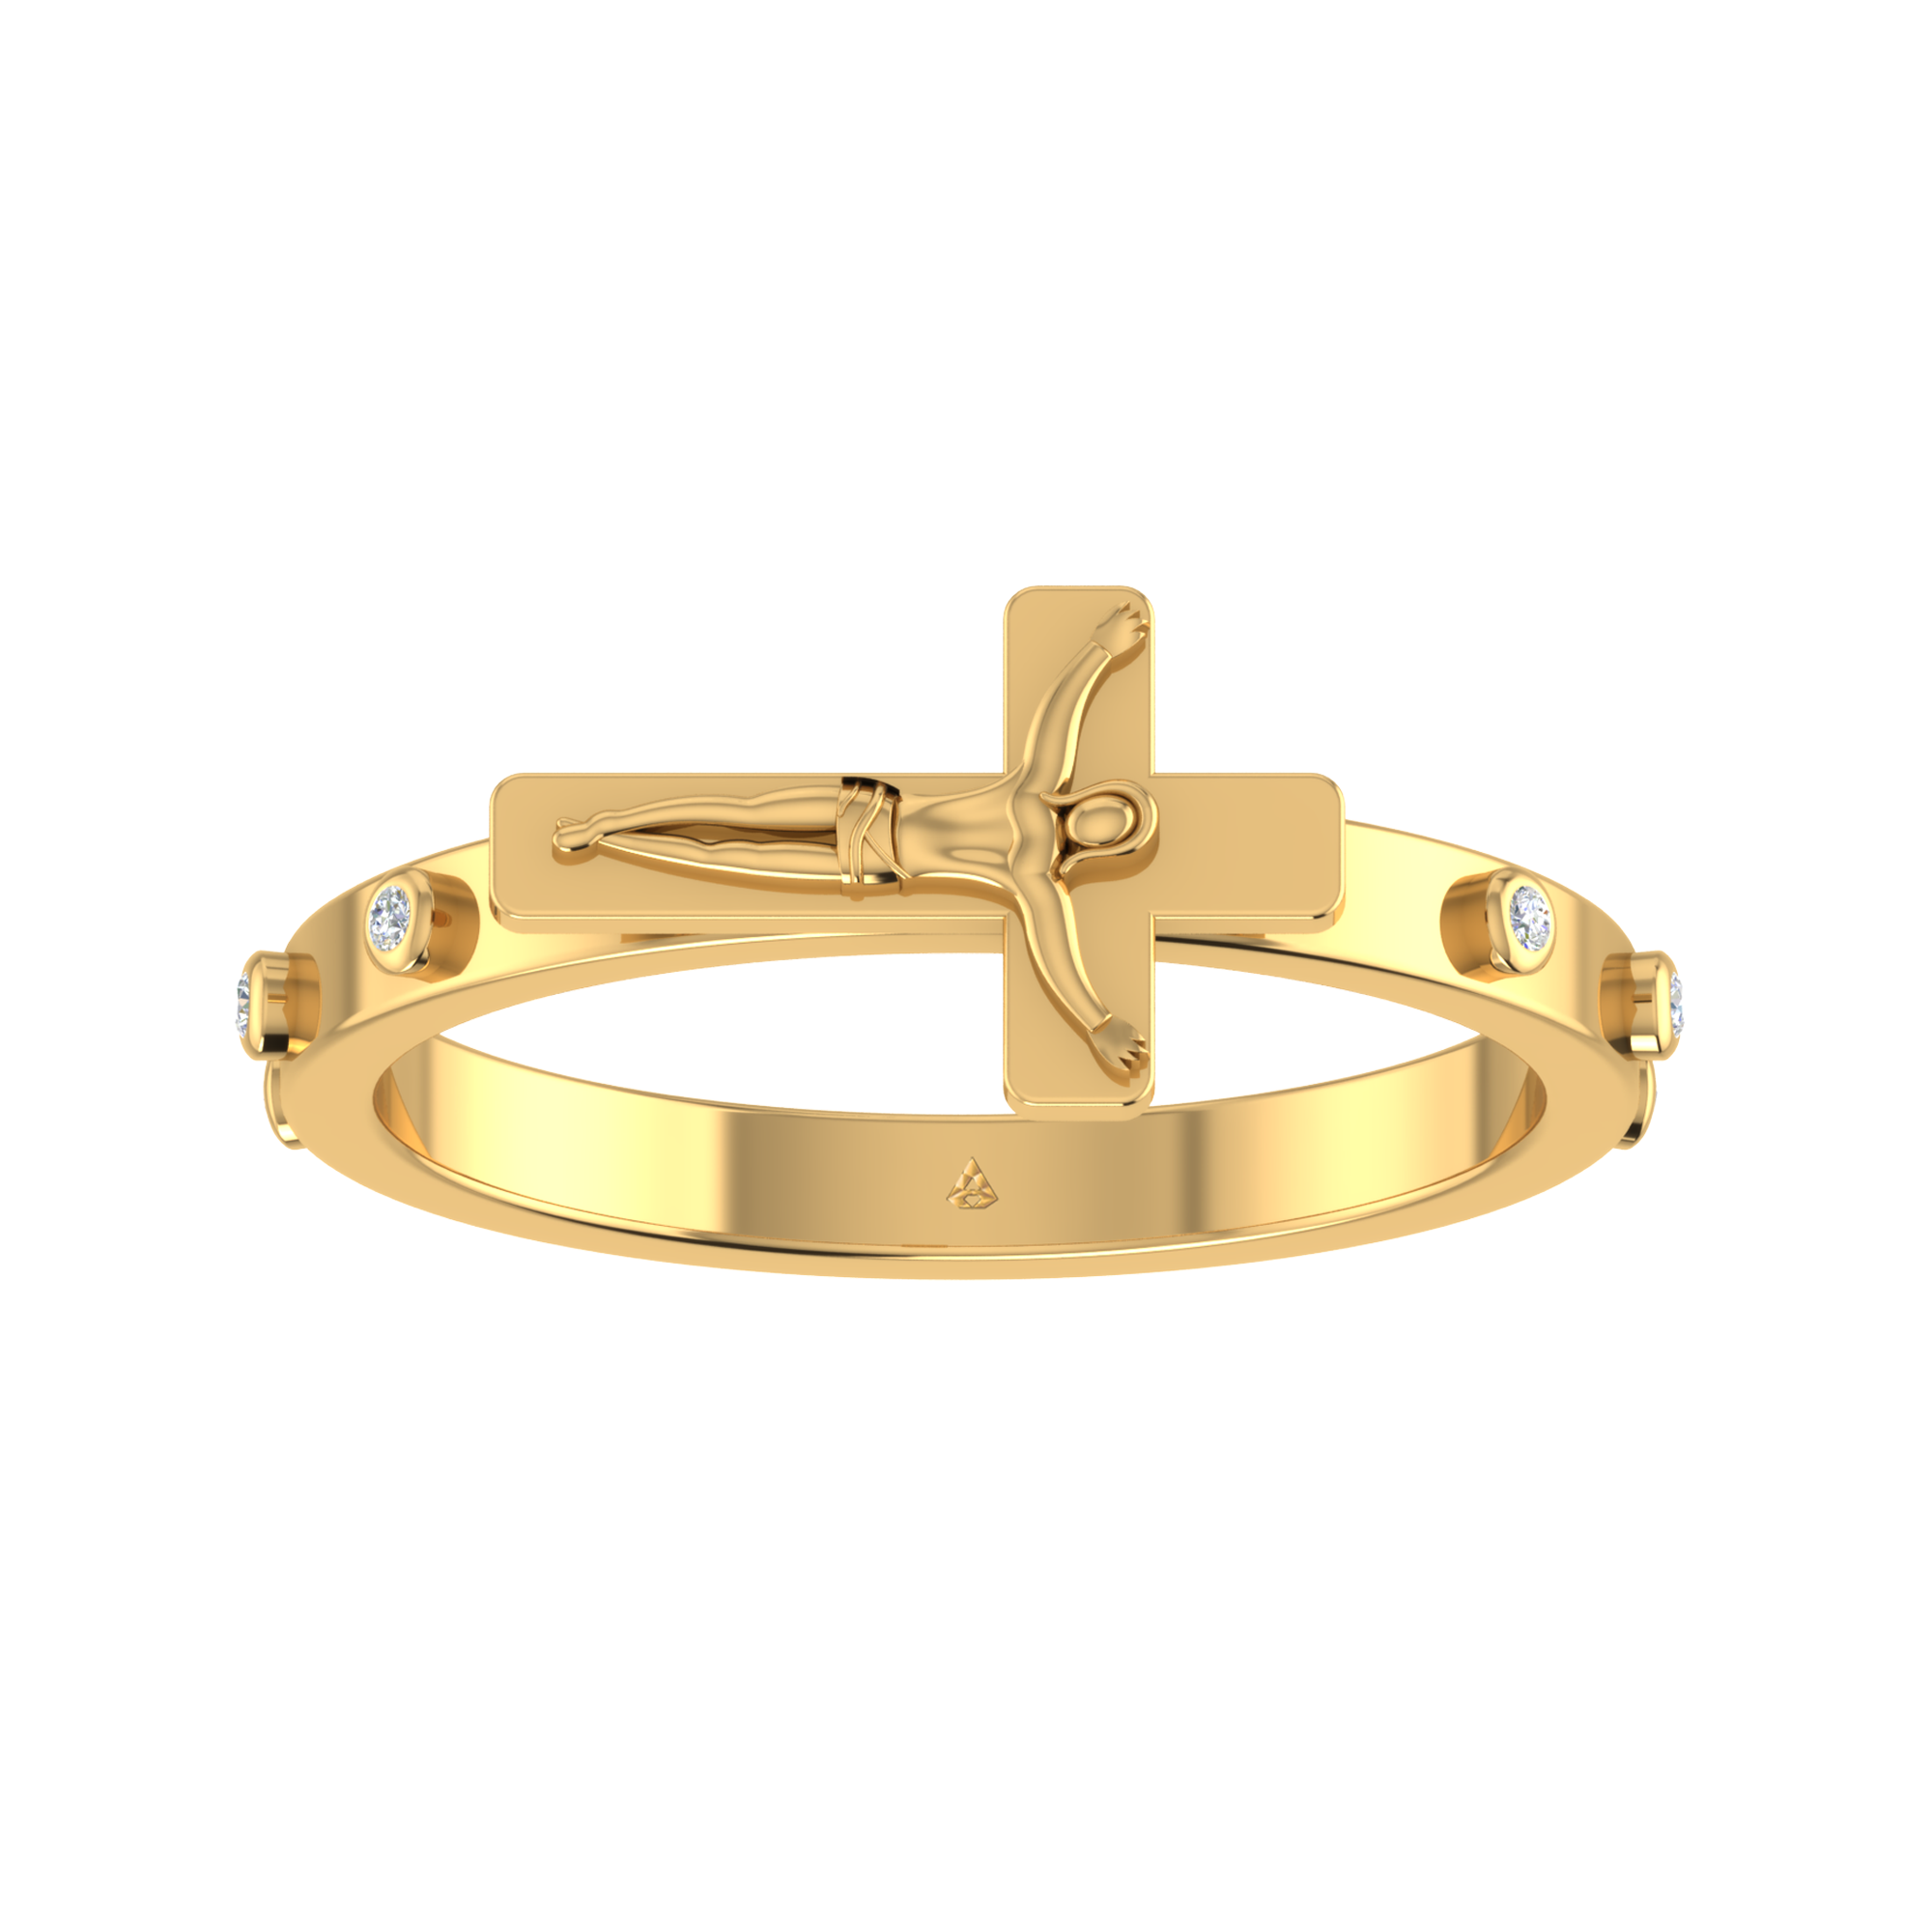 Rosary Ring With Mary On Oval Medium Gold | Online Christian Supplies Shop